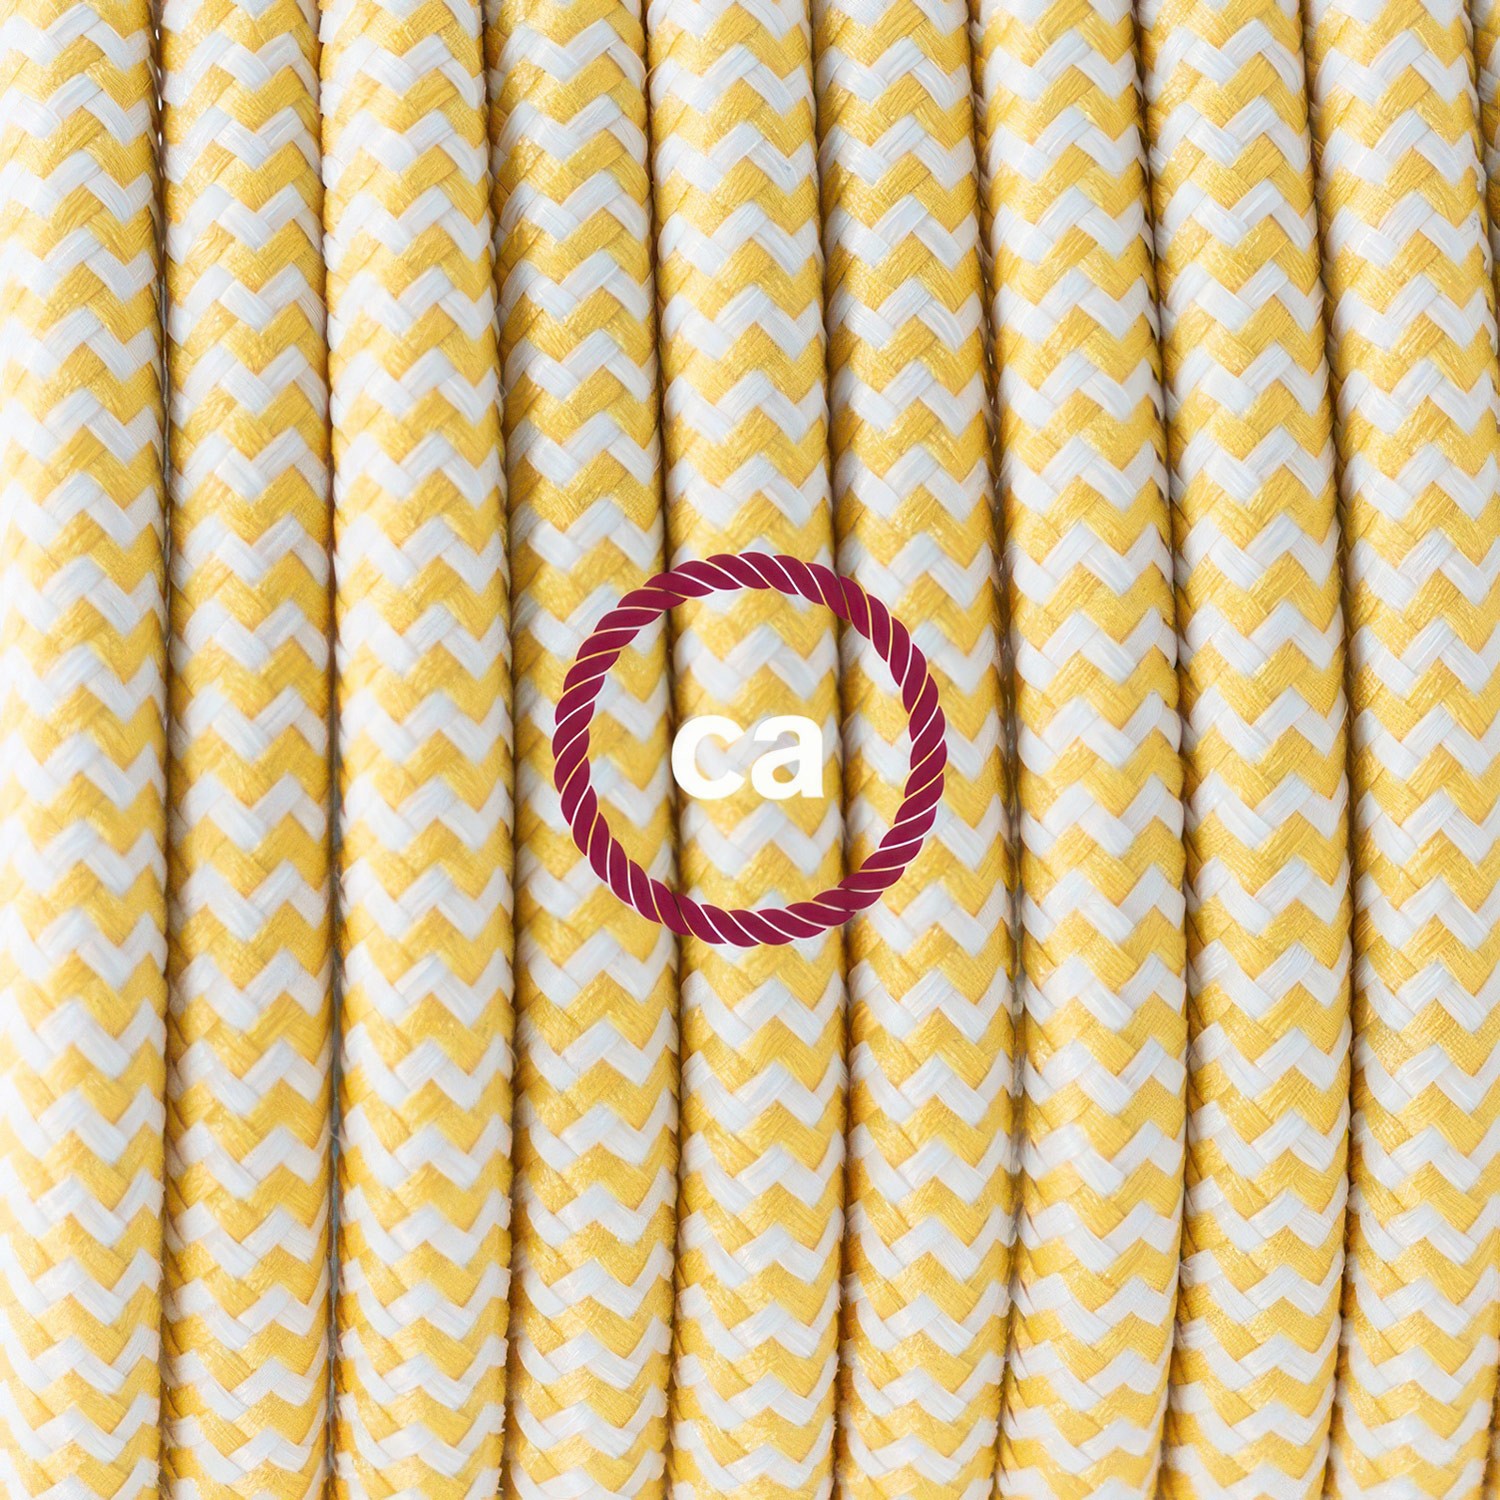 Wiring Pedestal, RZ10 Yellow ZigZag Rayon 3 m. Choose the colour of the switch and plug.